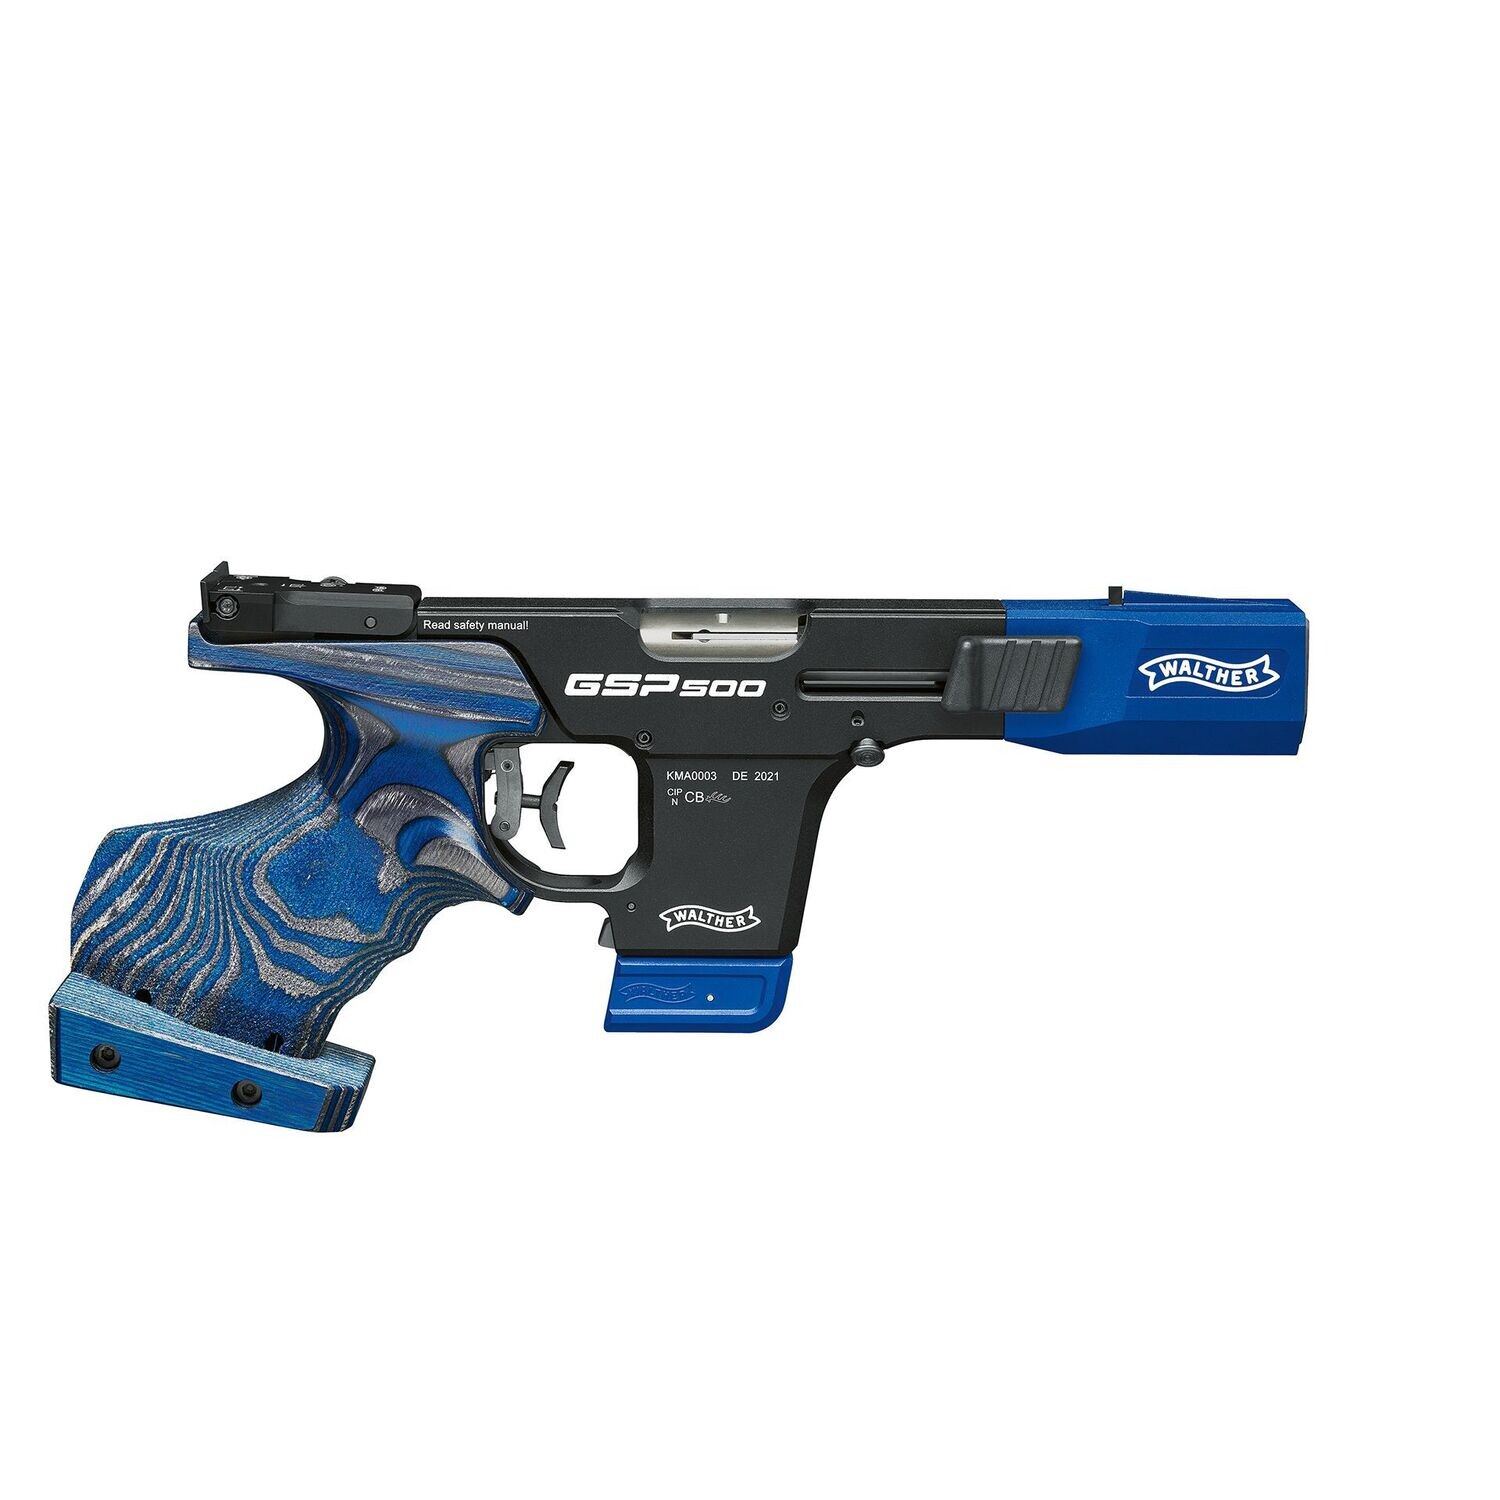 Walther GSP 500 .22LR